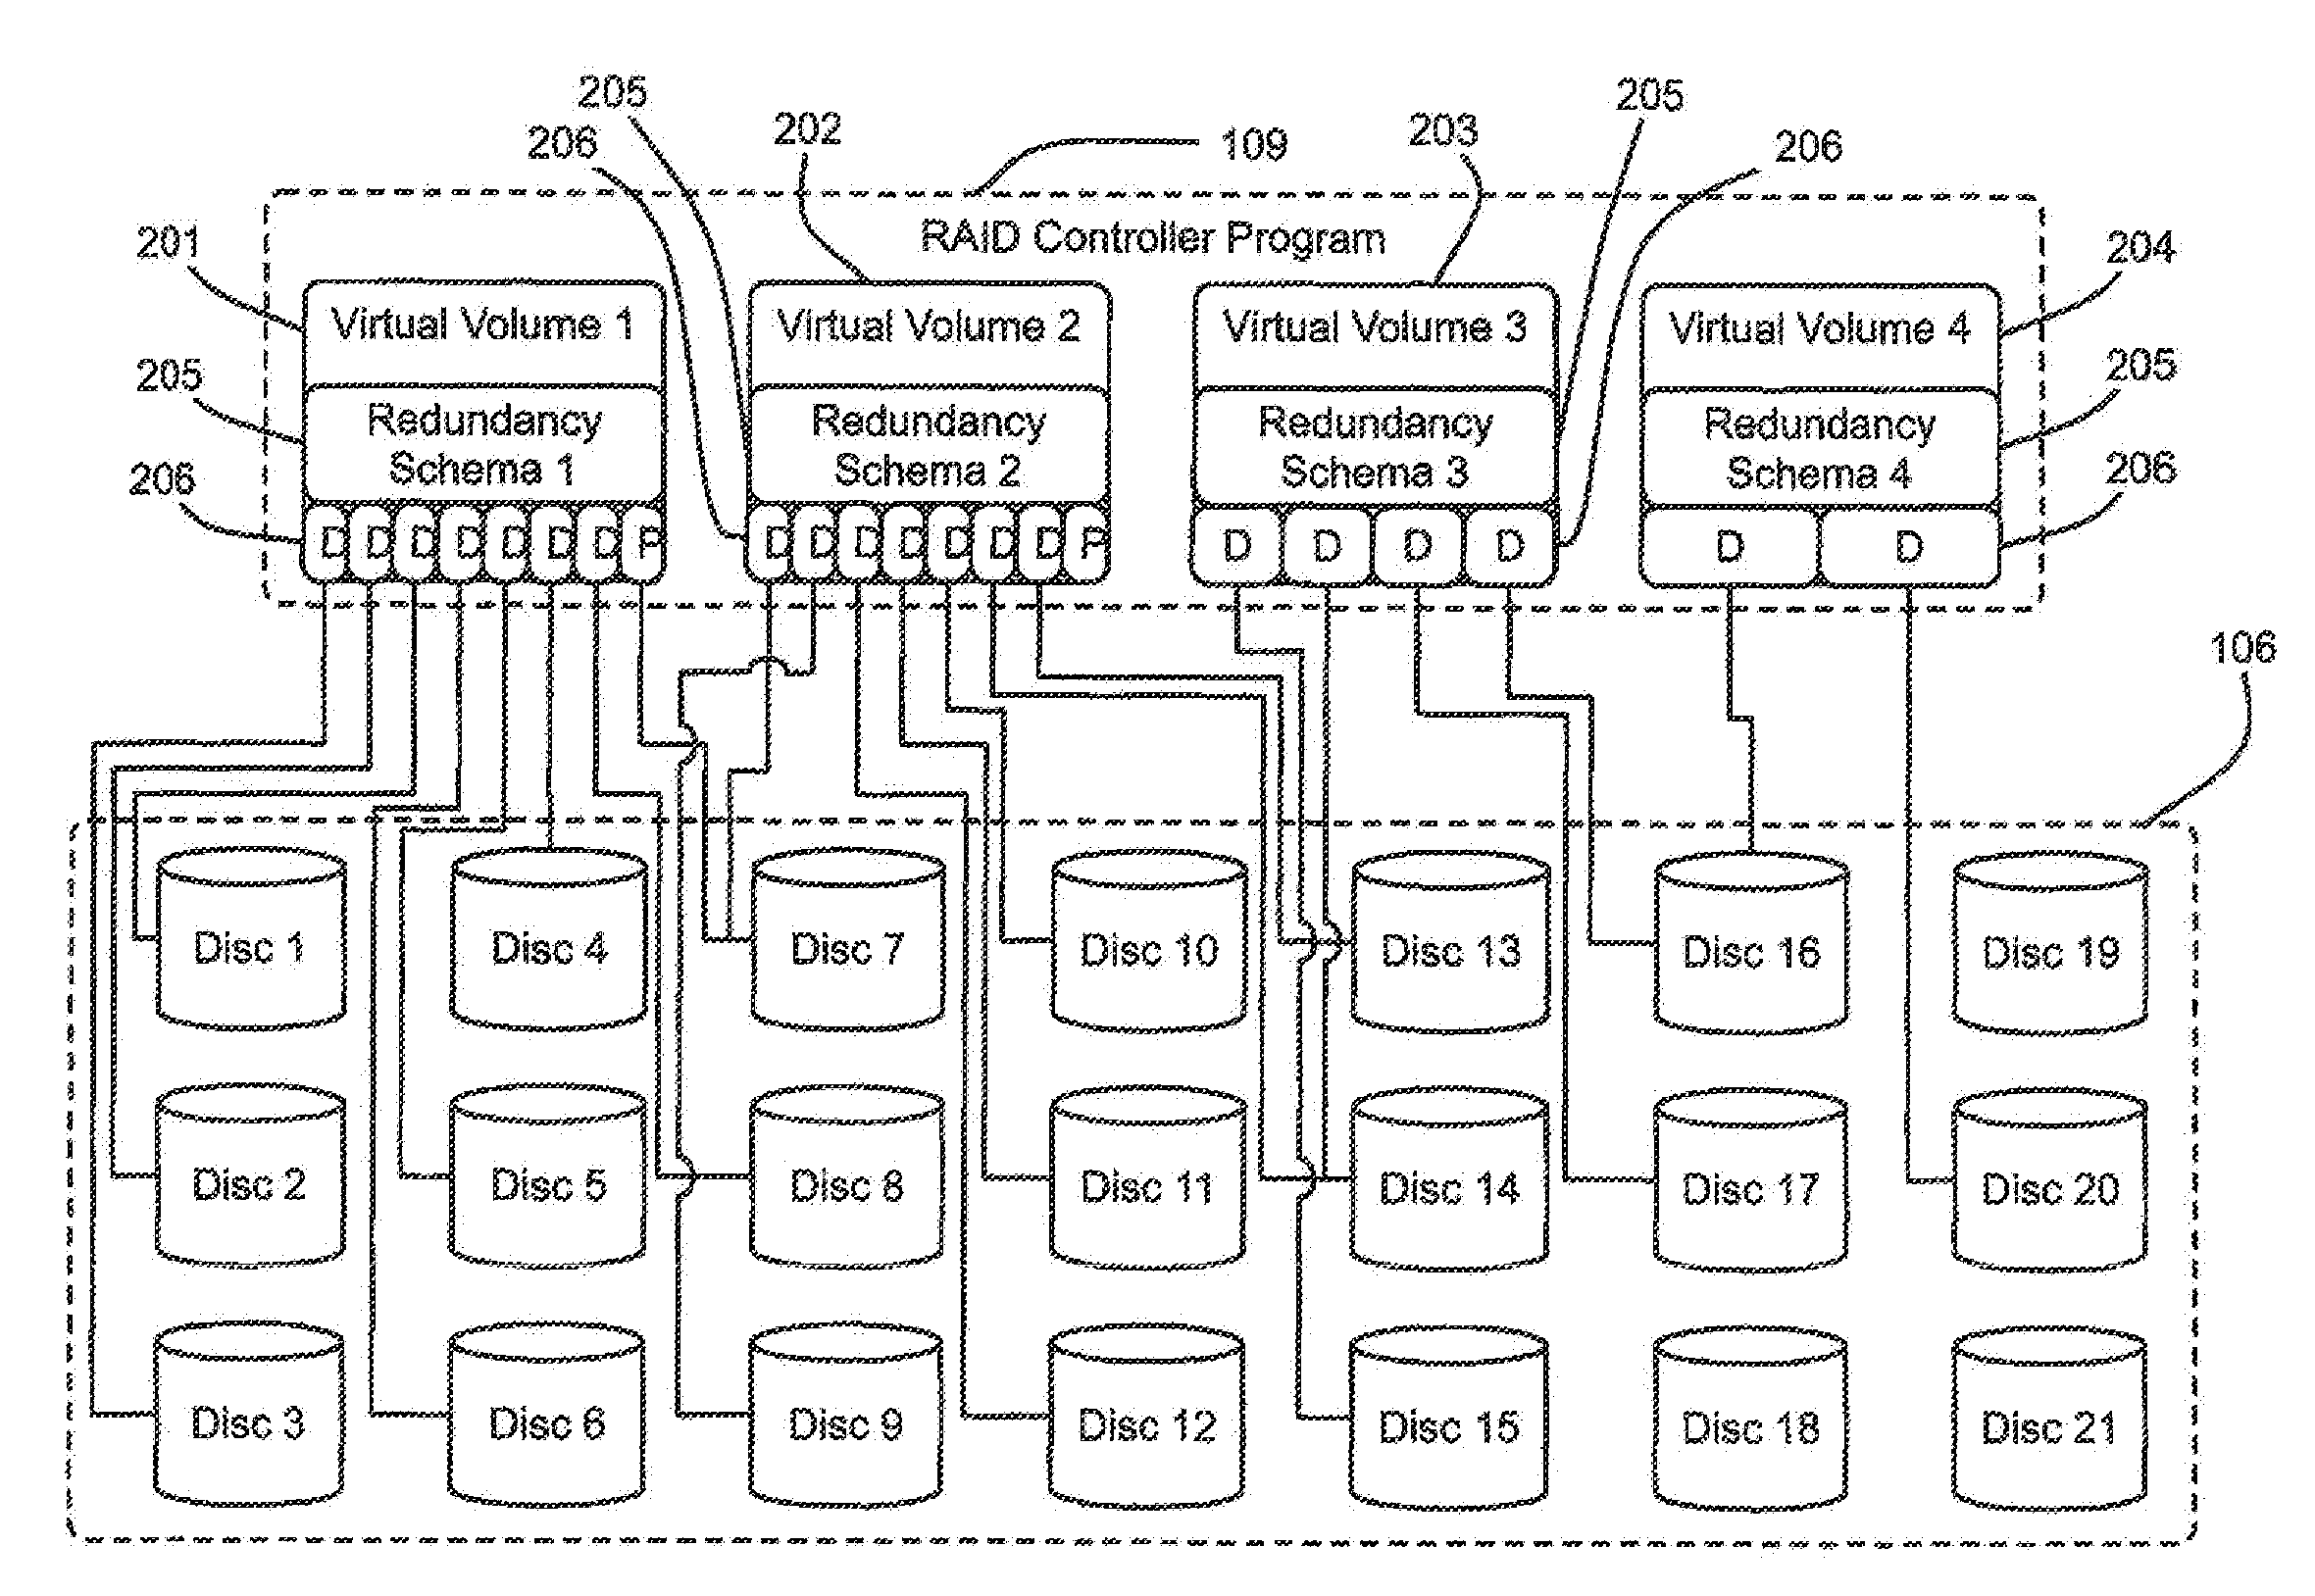 Providing redundancy in a virtualized storage system for a computer system